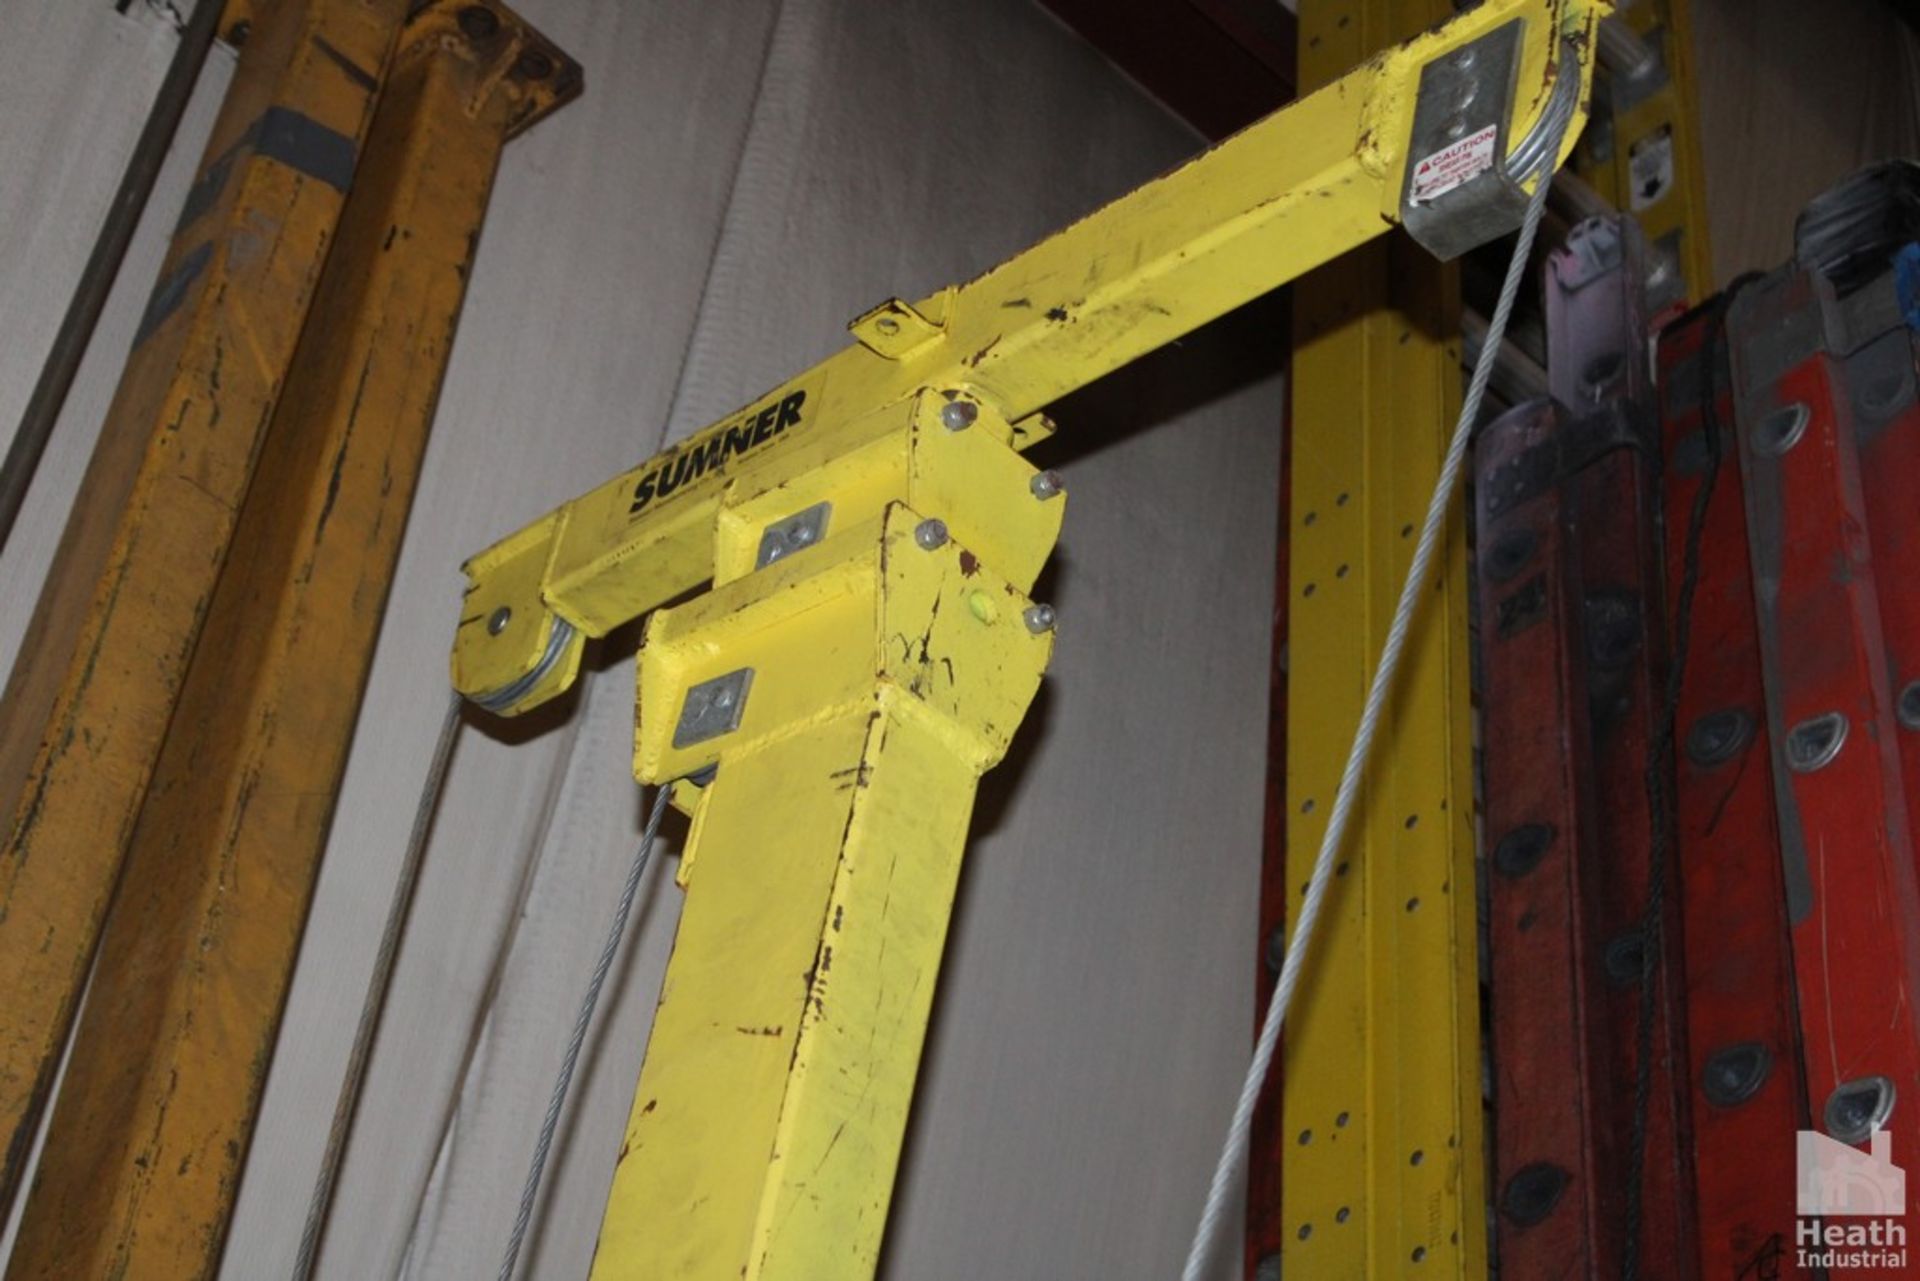 SUMNER ROUSTABOUT R-250 PORTABLE CABLE CRANE APPROX. 10'" HIGH - Image 2 of 4